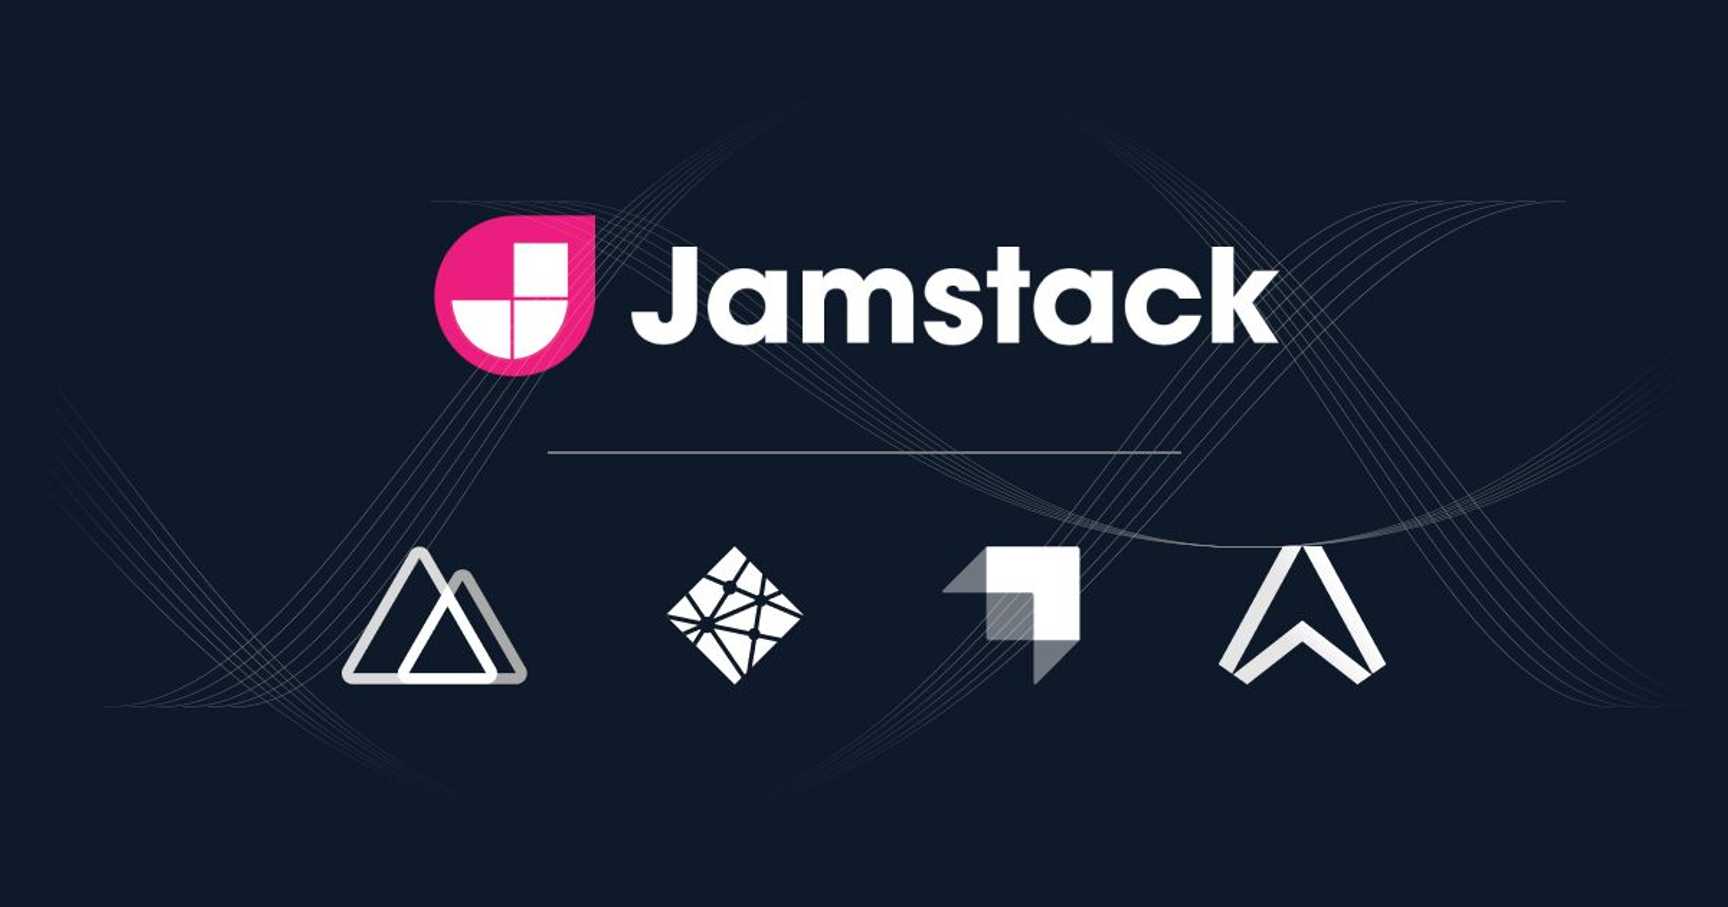 Myth-busting: Jamstack can't handle dynamic content